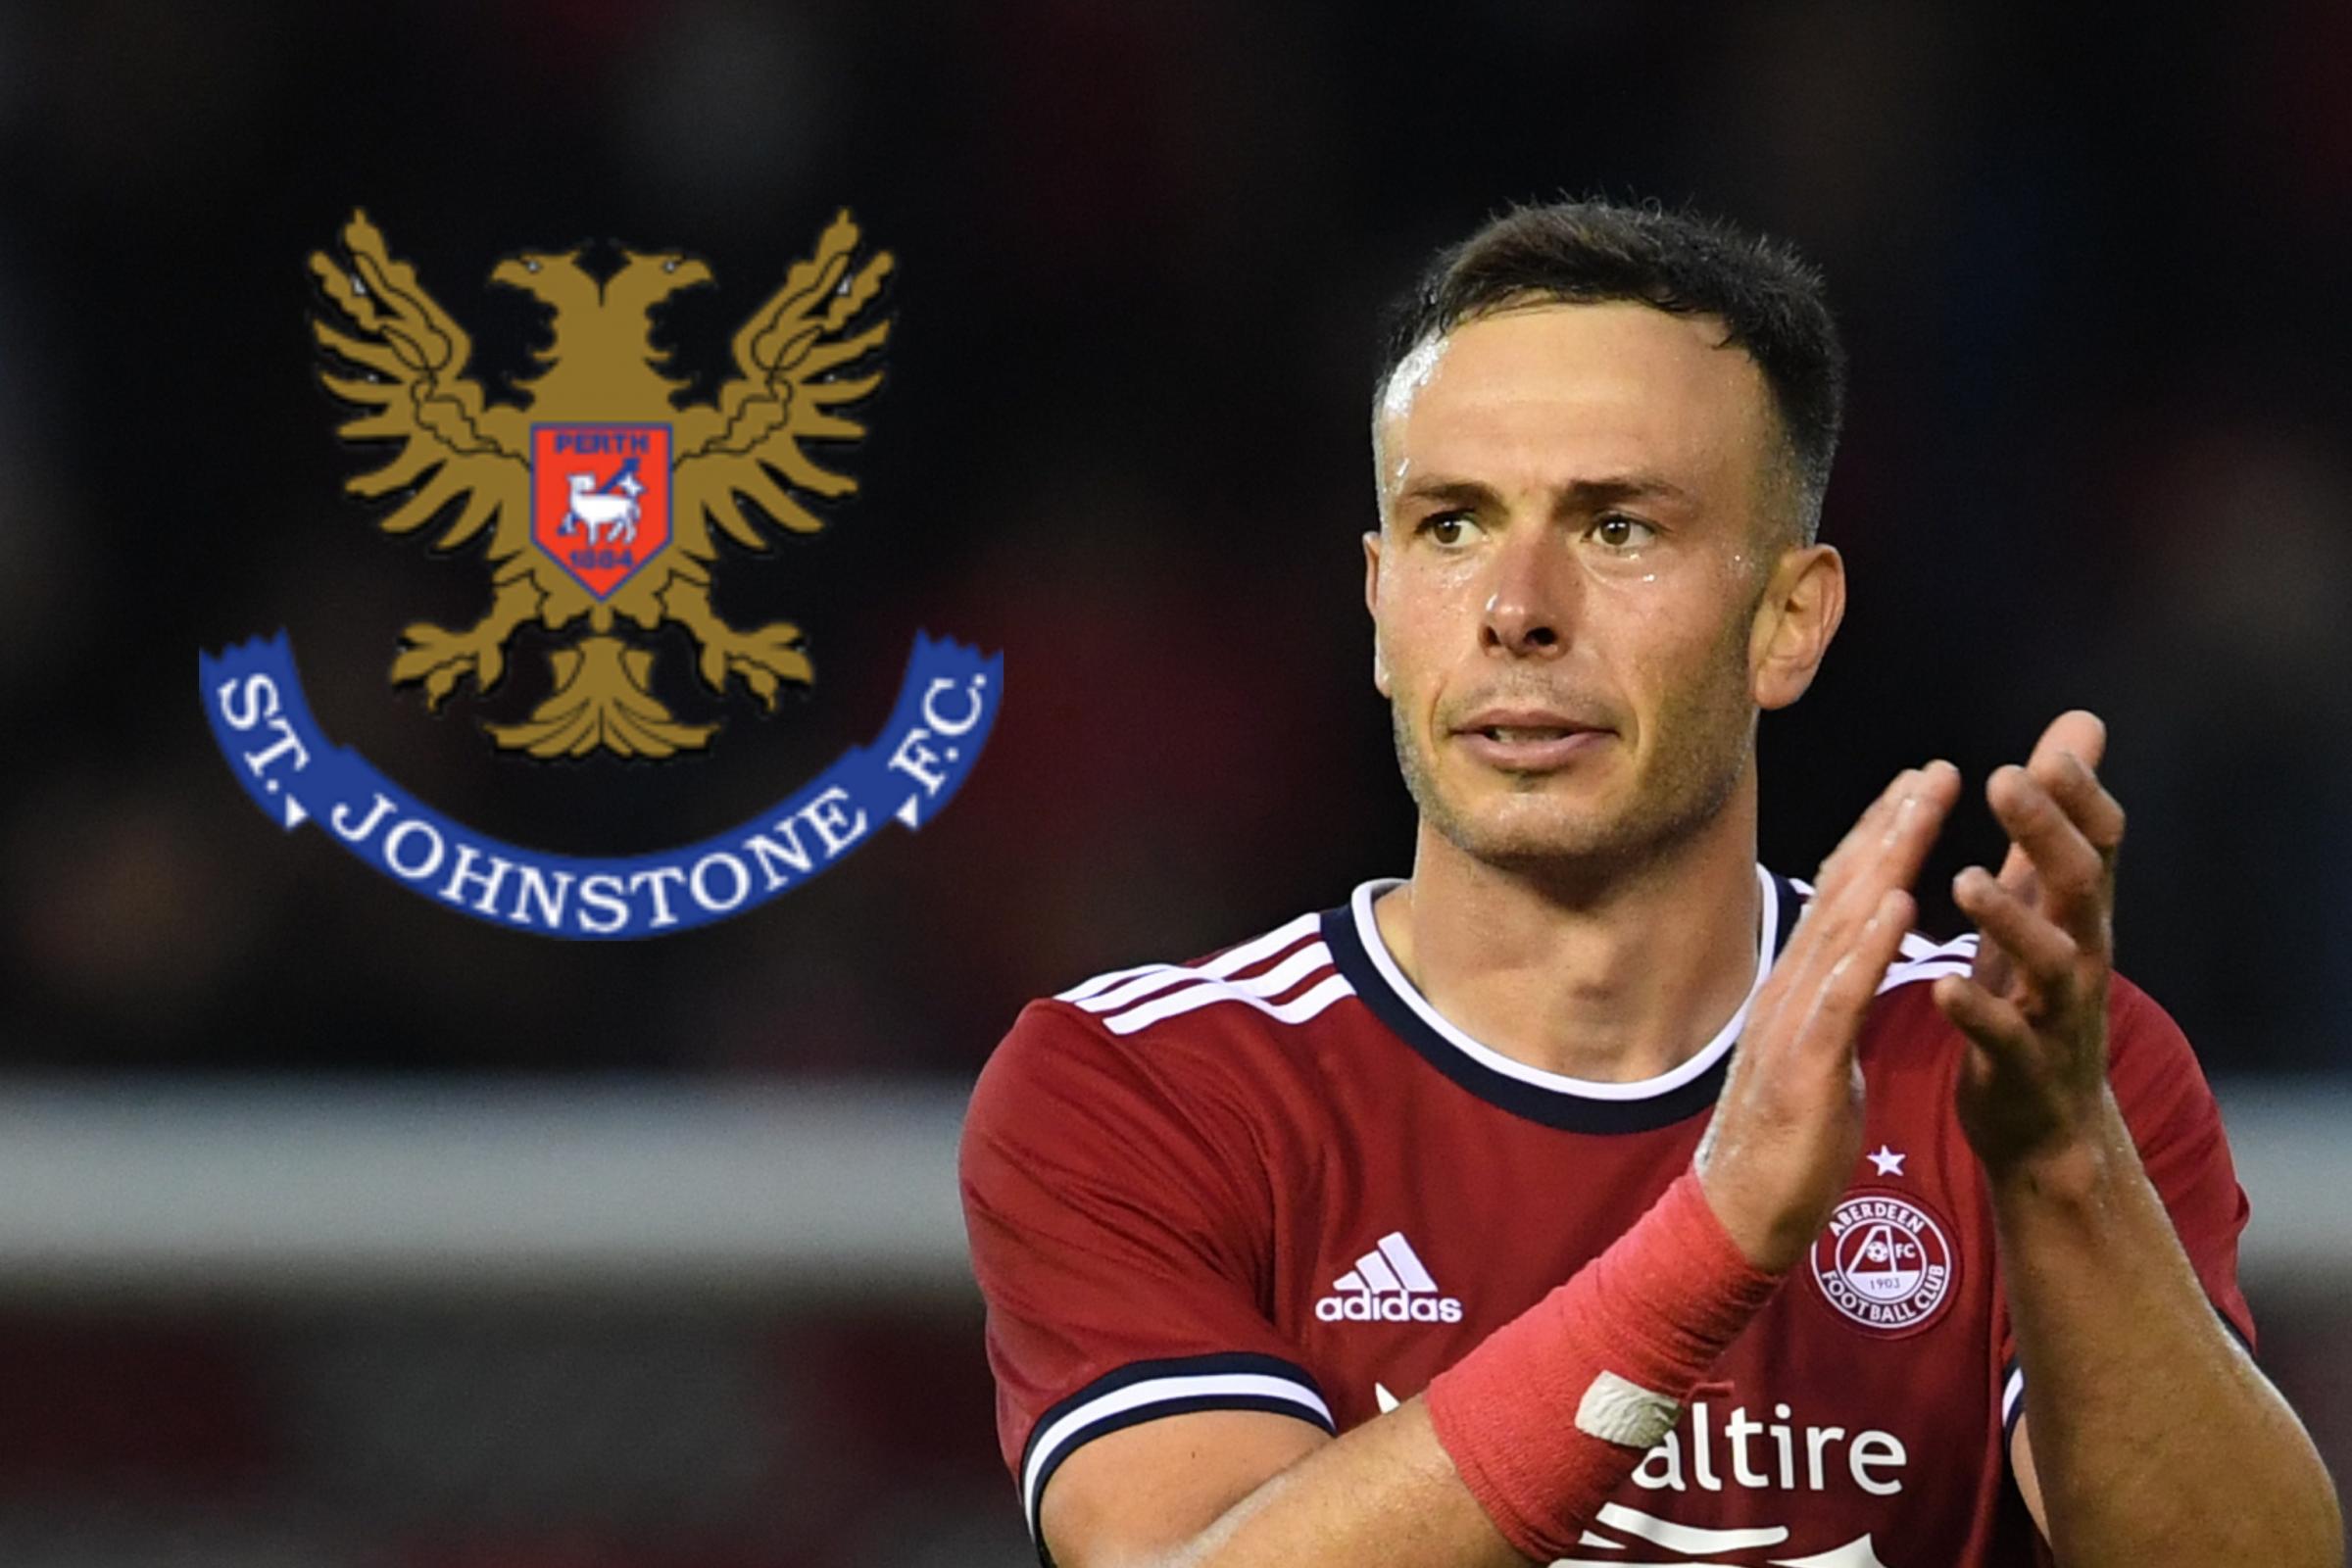 Andy Considine set for St Johnstone move after ending 18-year stint with Aberdeen